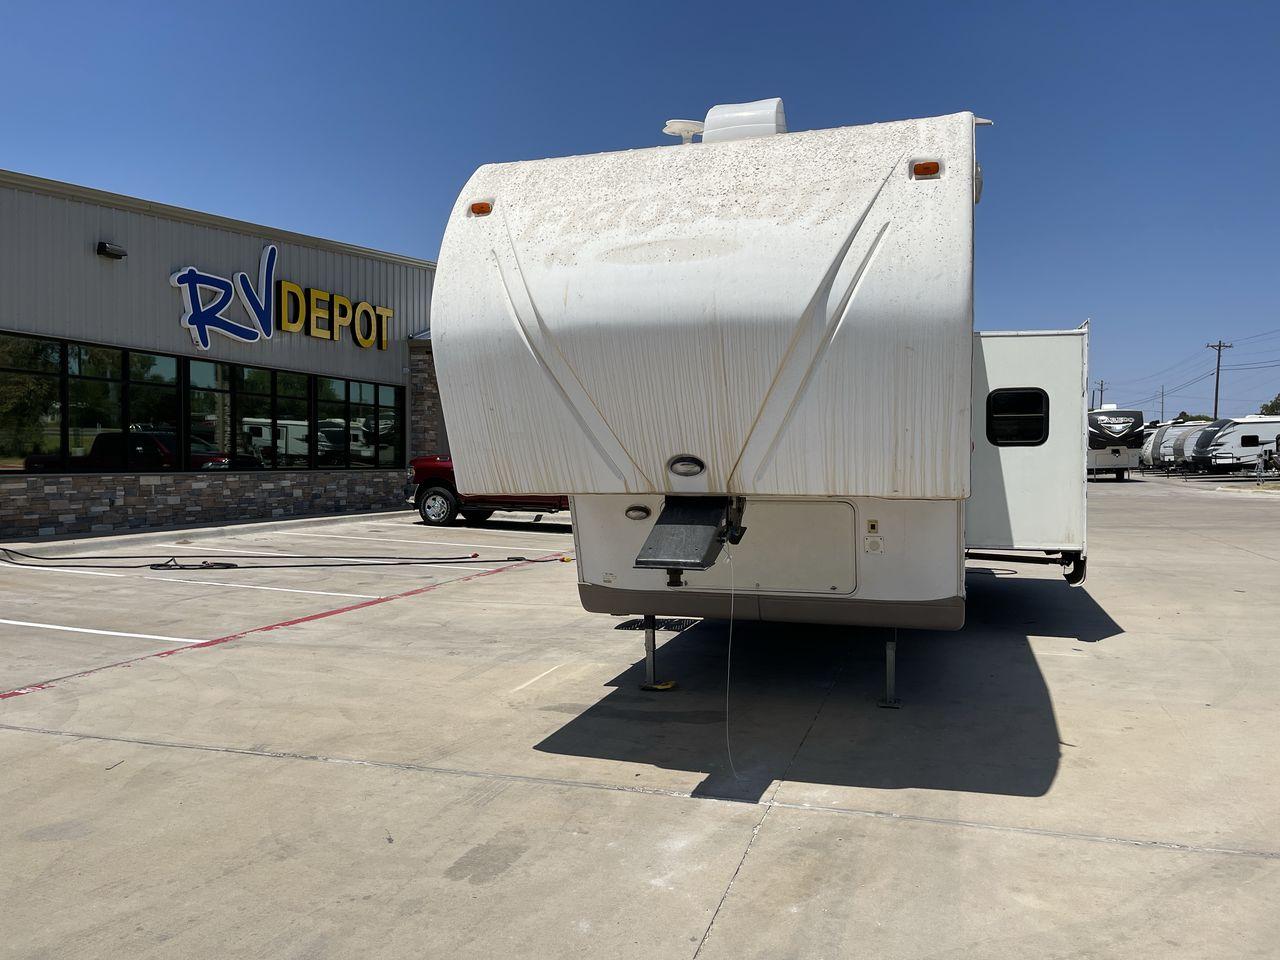 2010 WHITE FLAGSTAFF 8528CKSS - (4X4FFLD20A1) , Length: 30 ft. | Dry Weight: 6,877 lbs. | Slides: 2 transmission, located at 4319 N Main St, Cleburne, TX, 76033, (817) 678-5133, 32.385960, -97.391212 - The 2010 Flagstaff 8528CKSS CT is a well-crafted and compact travel trailer designed for comfort and convenience on the road. With a length of 30 feet 11 inches, a width of 8 feet, and a height of 12 feet 7 inches, this trailer offers a balance of space and maneuverability. Its thoughtful constructi - Photo #0